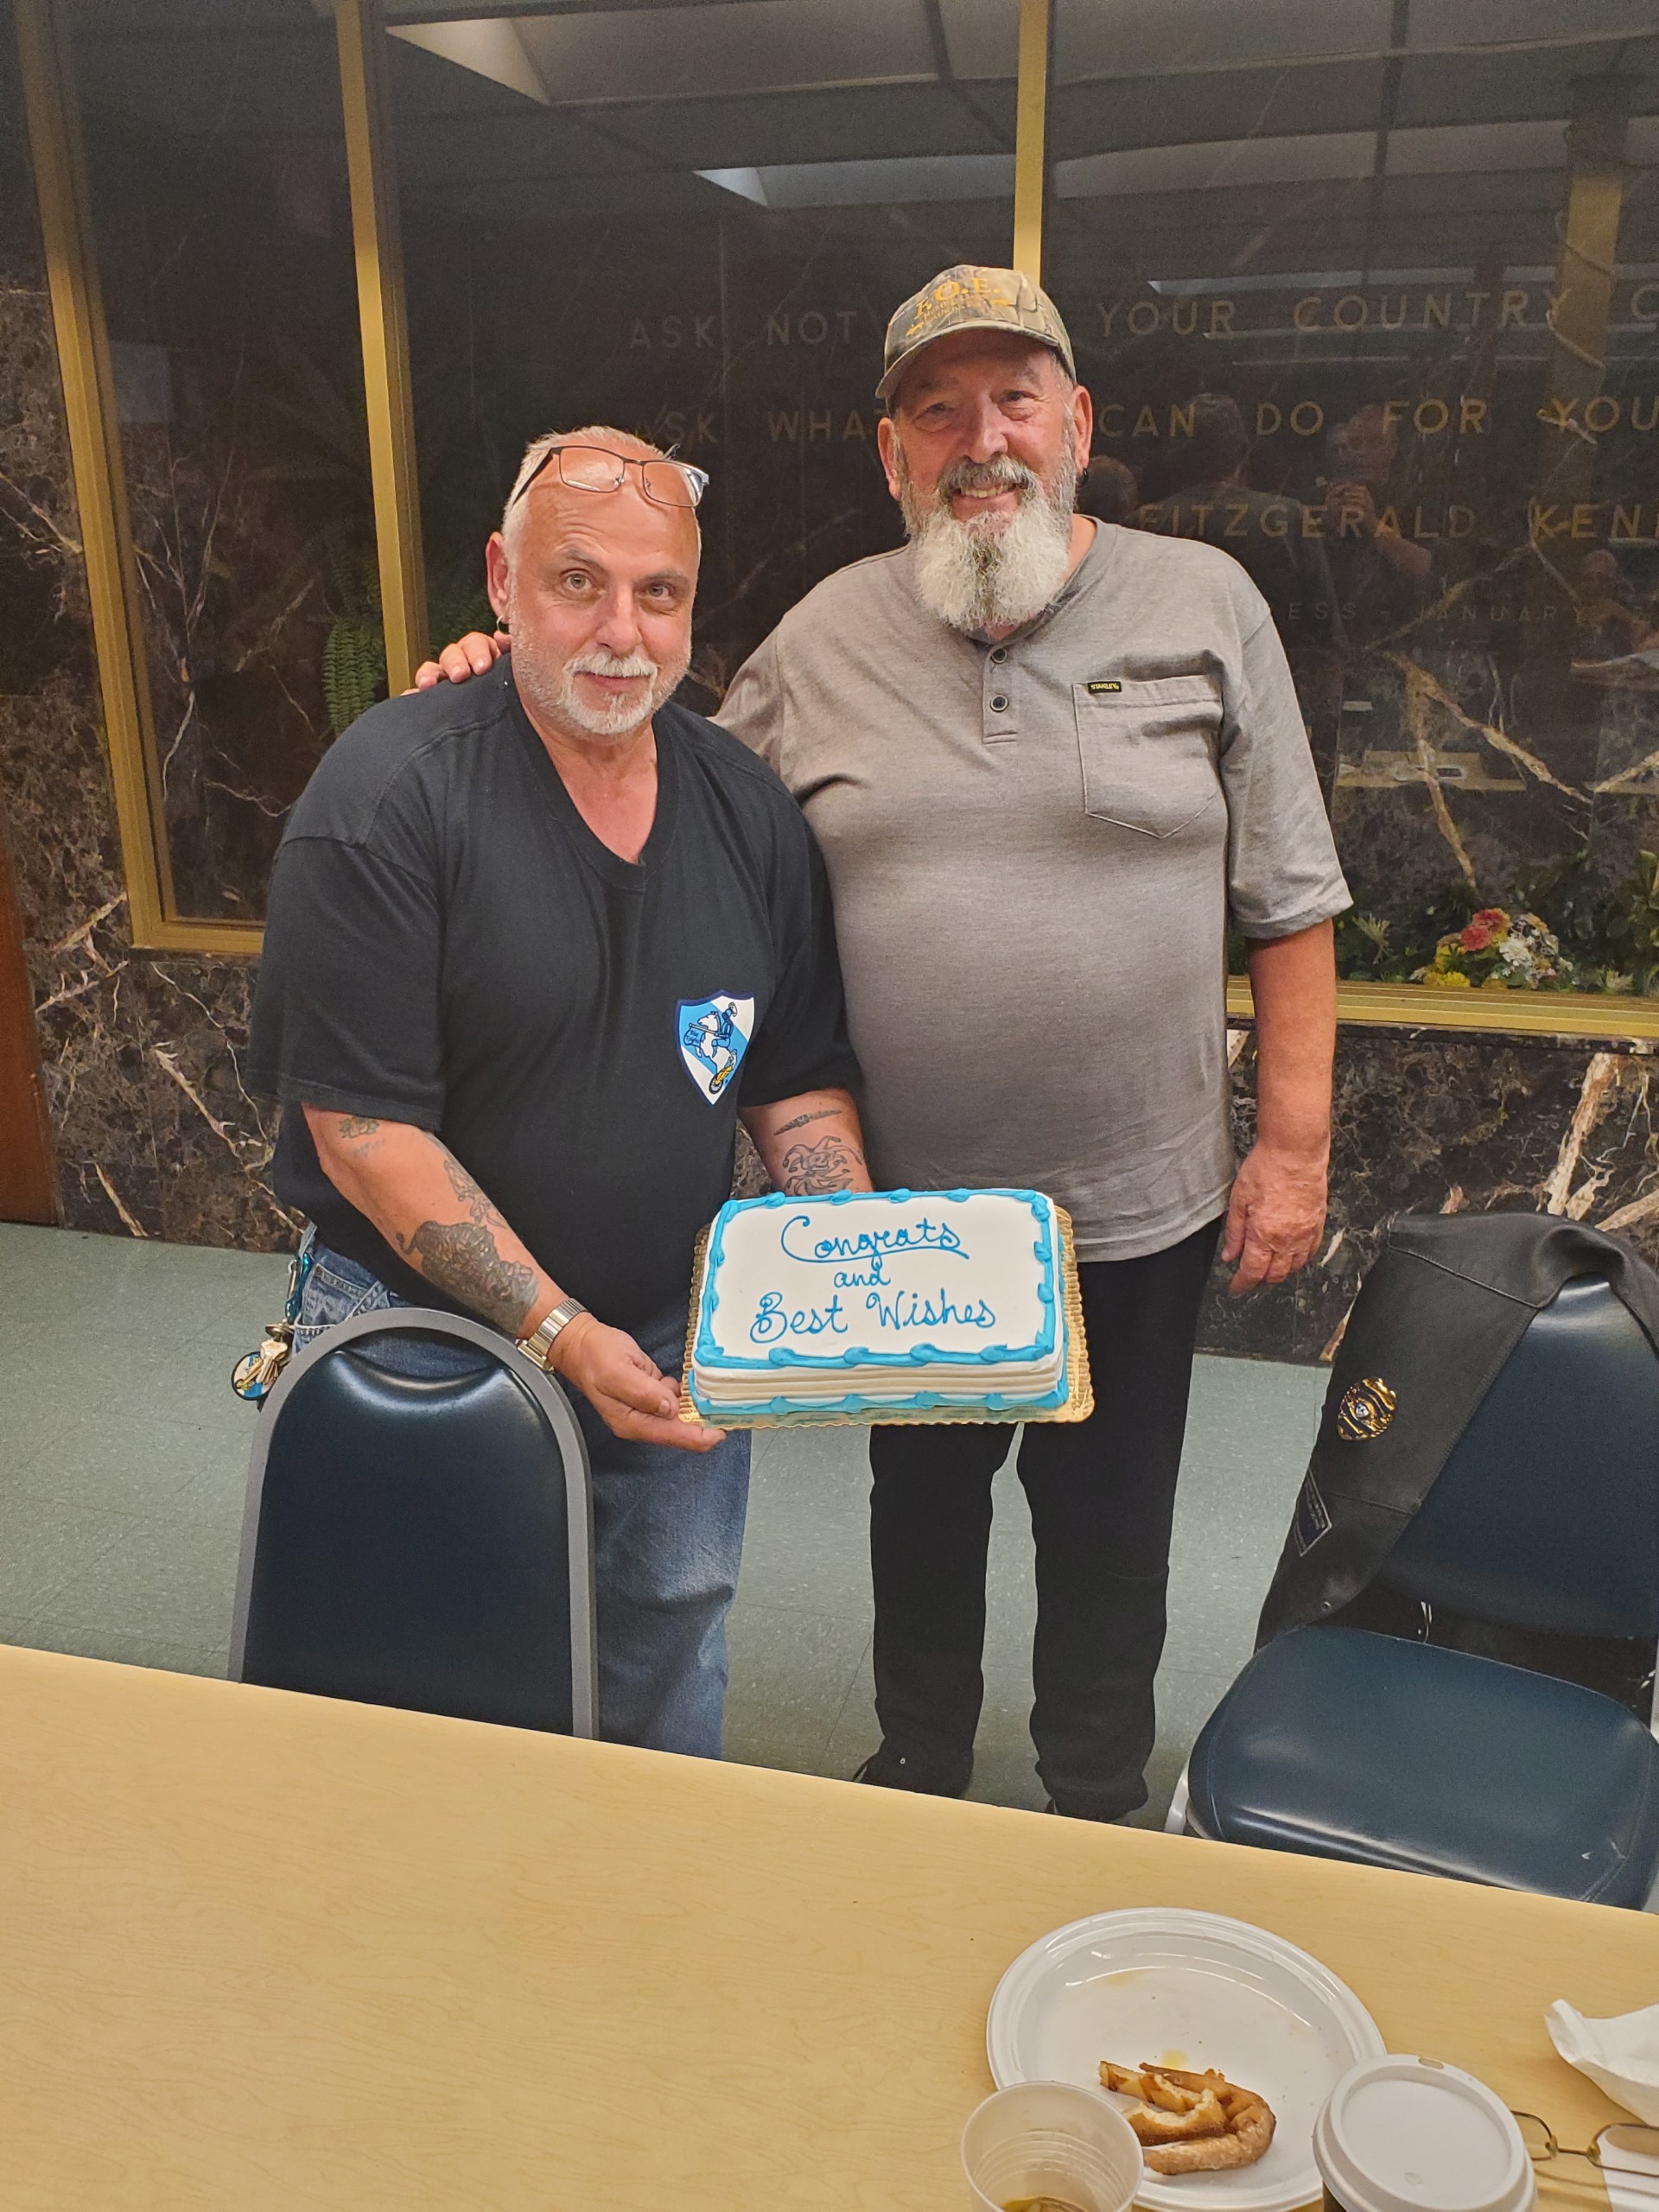 Gene Rosenfeld presents our VP Ed Defelice with a congratulatory cake for his recent marriage & upcoming move to Florida.